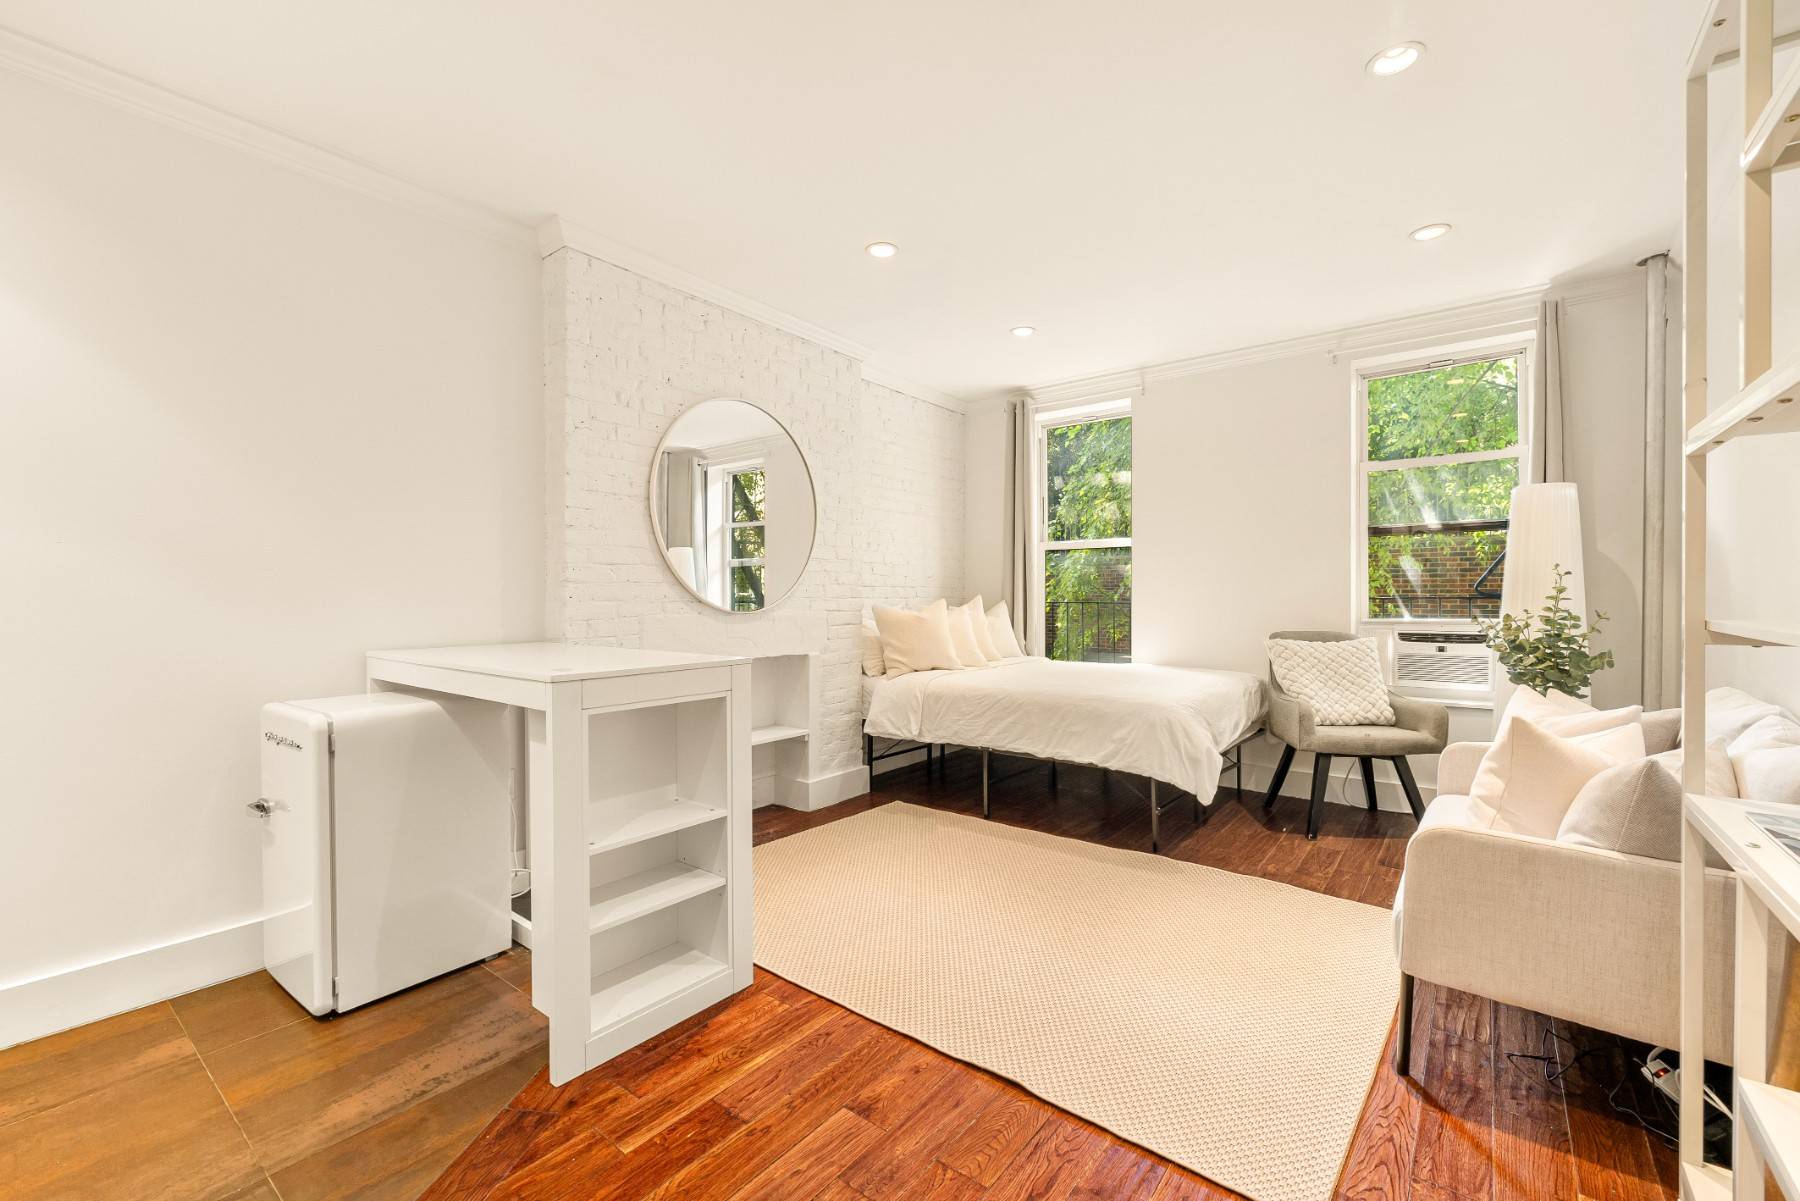 We are delighted to present this beautiful studio in one of New York Citys most prestigious neighborhoods, the West Village.